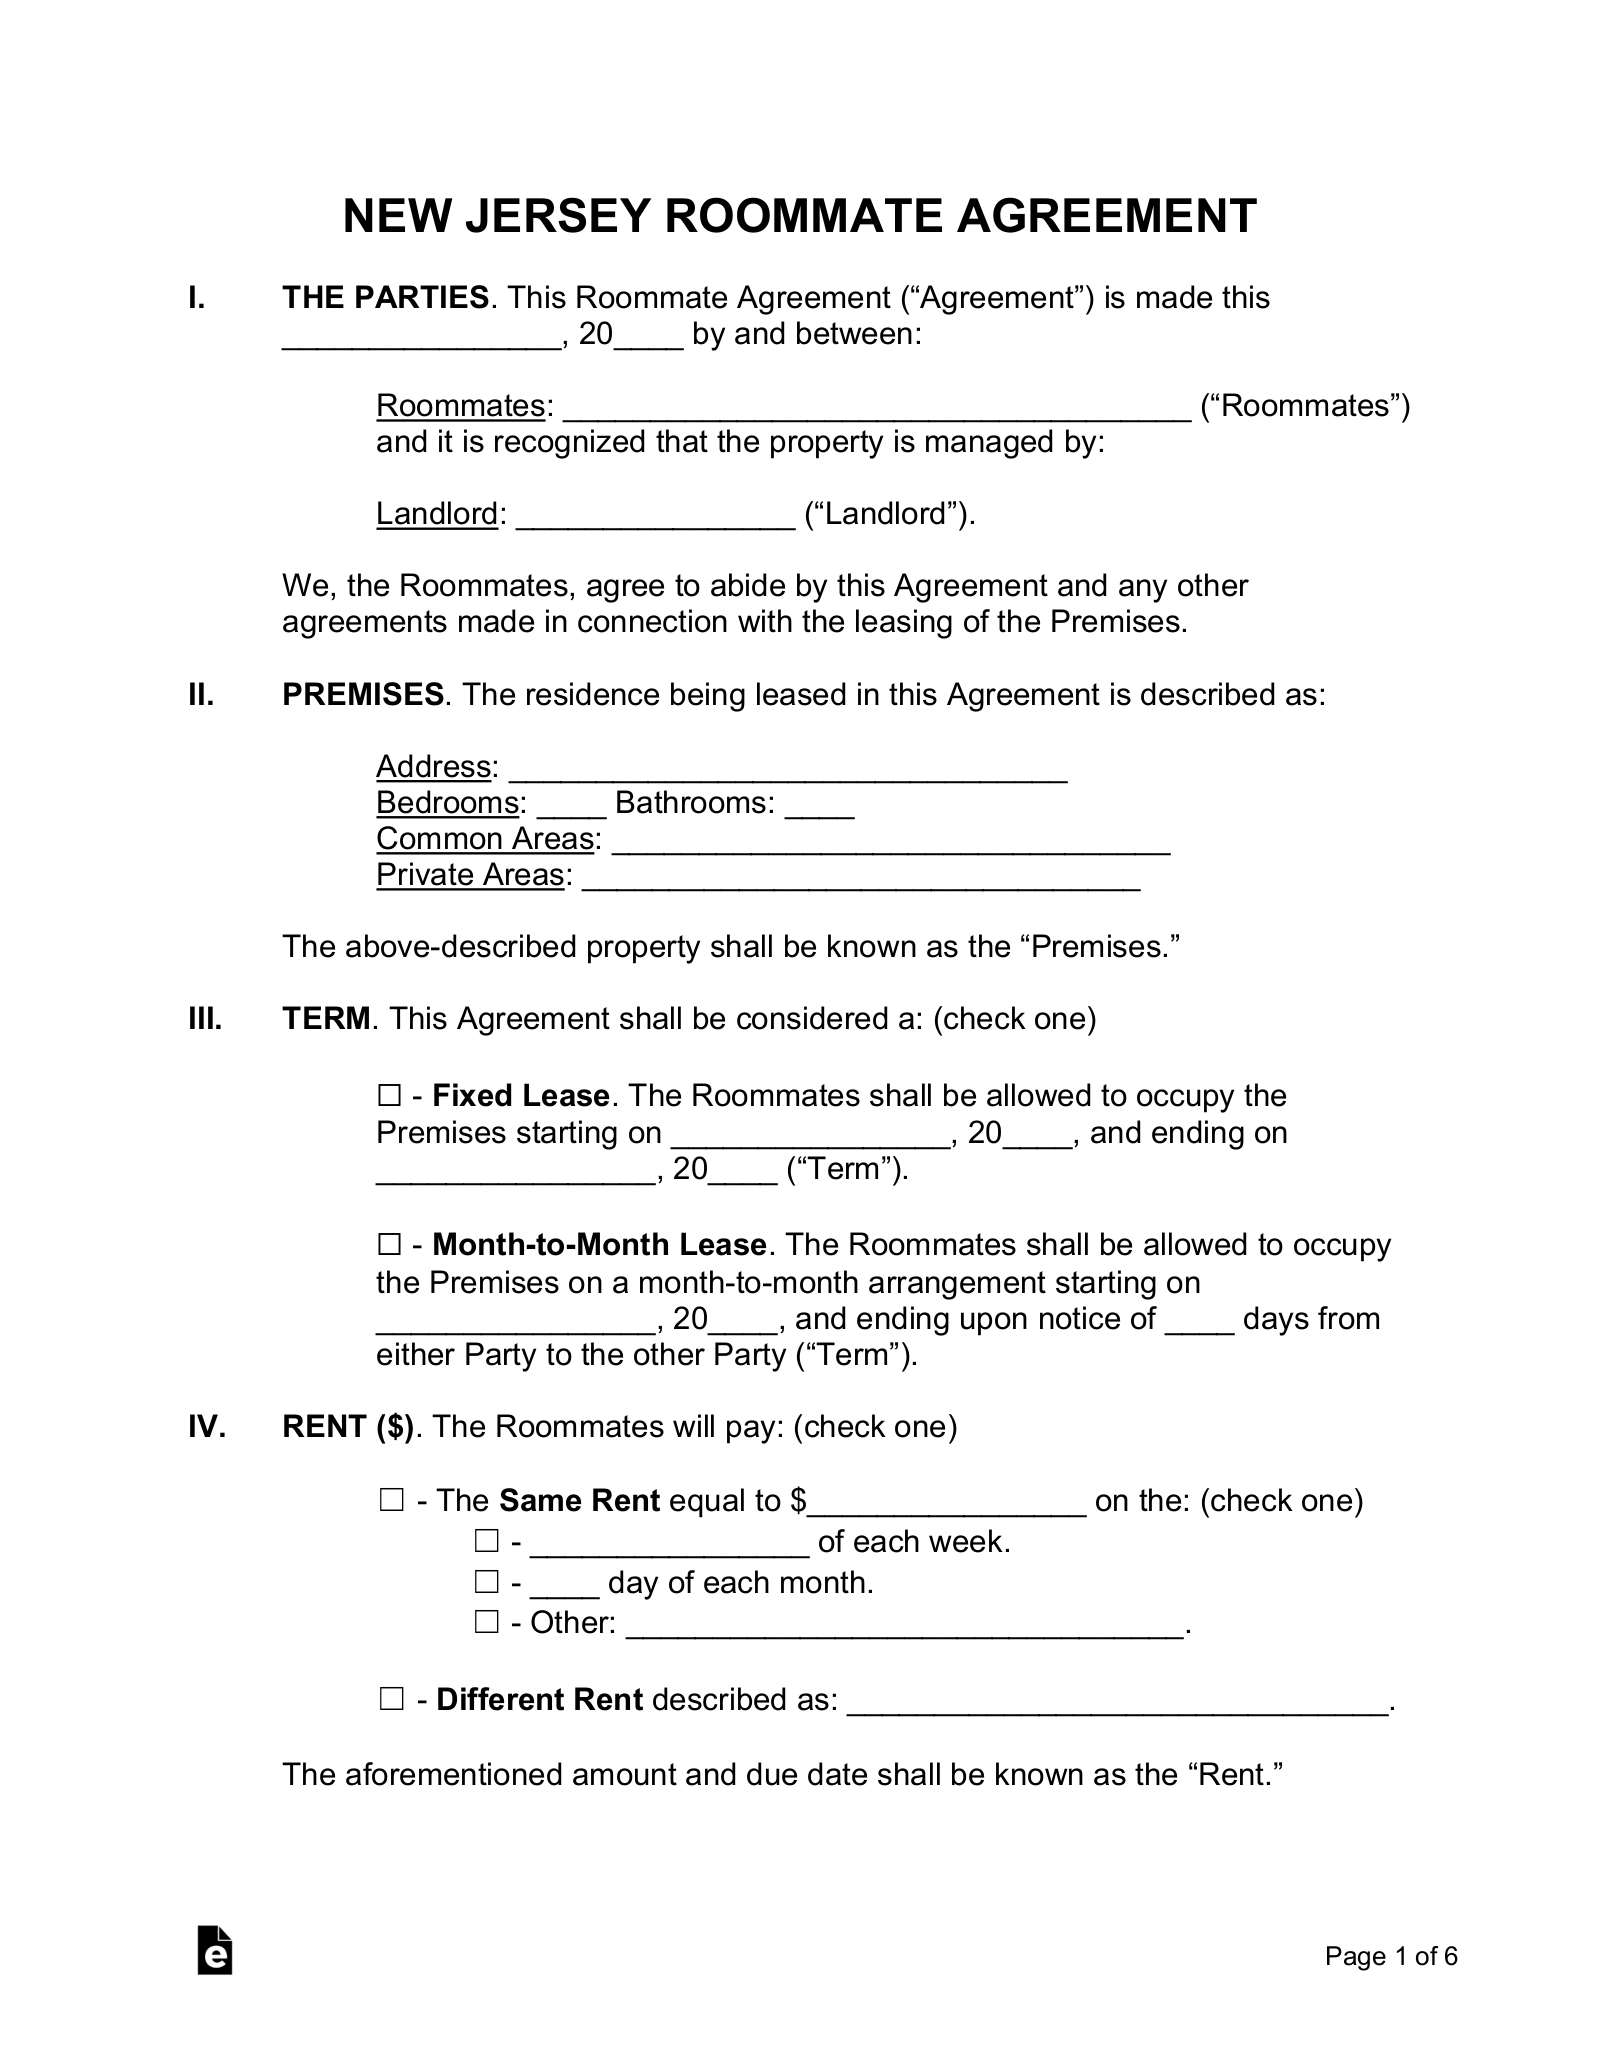 New Jersey Roommate Agreement Form